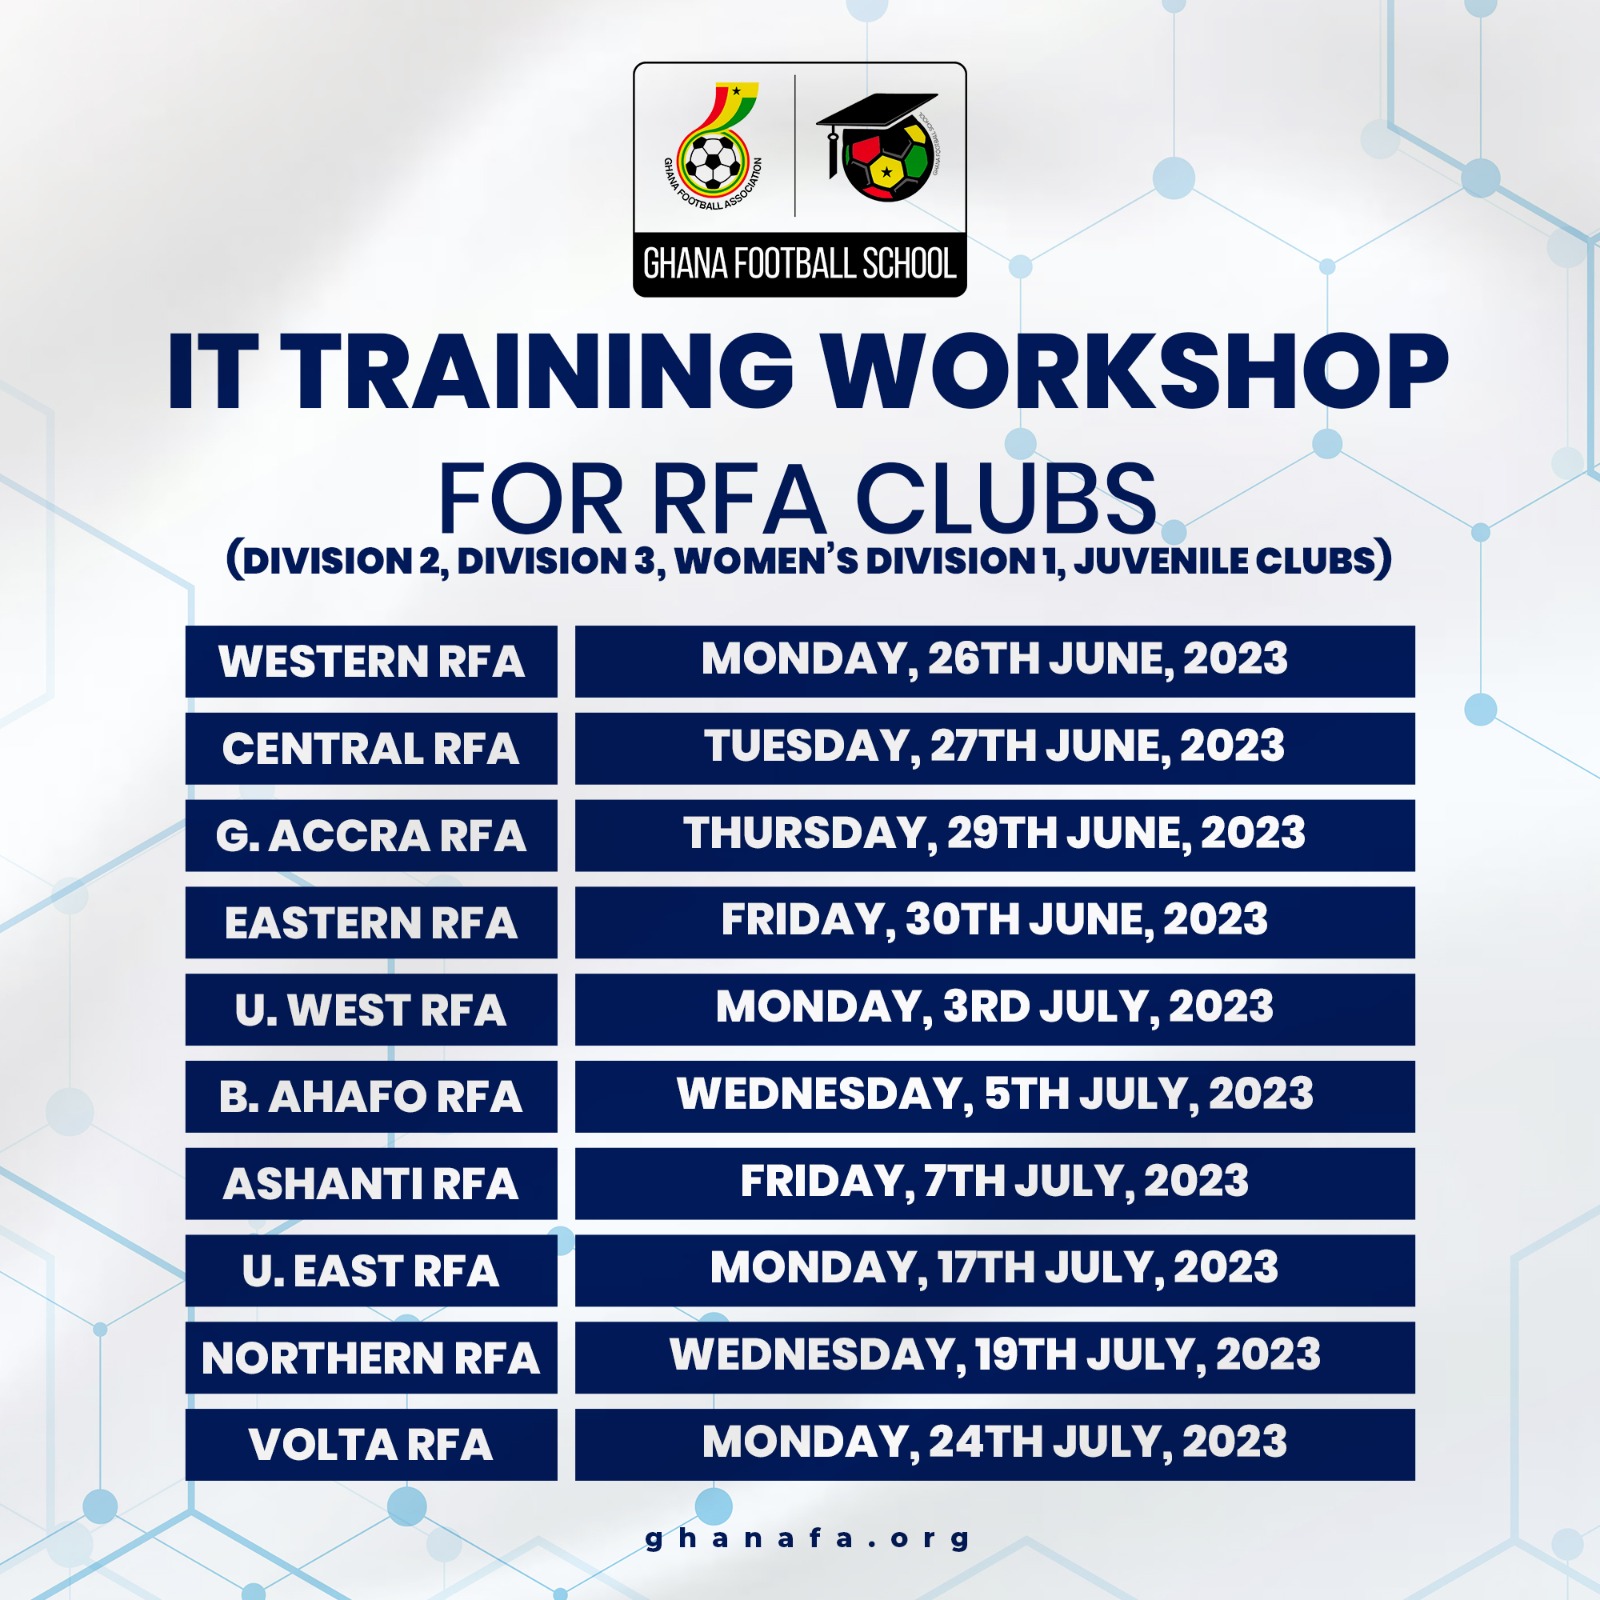 IT department release schedule for training of regional clubs